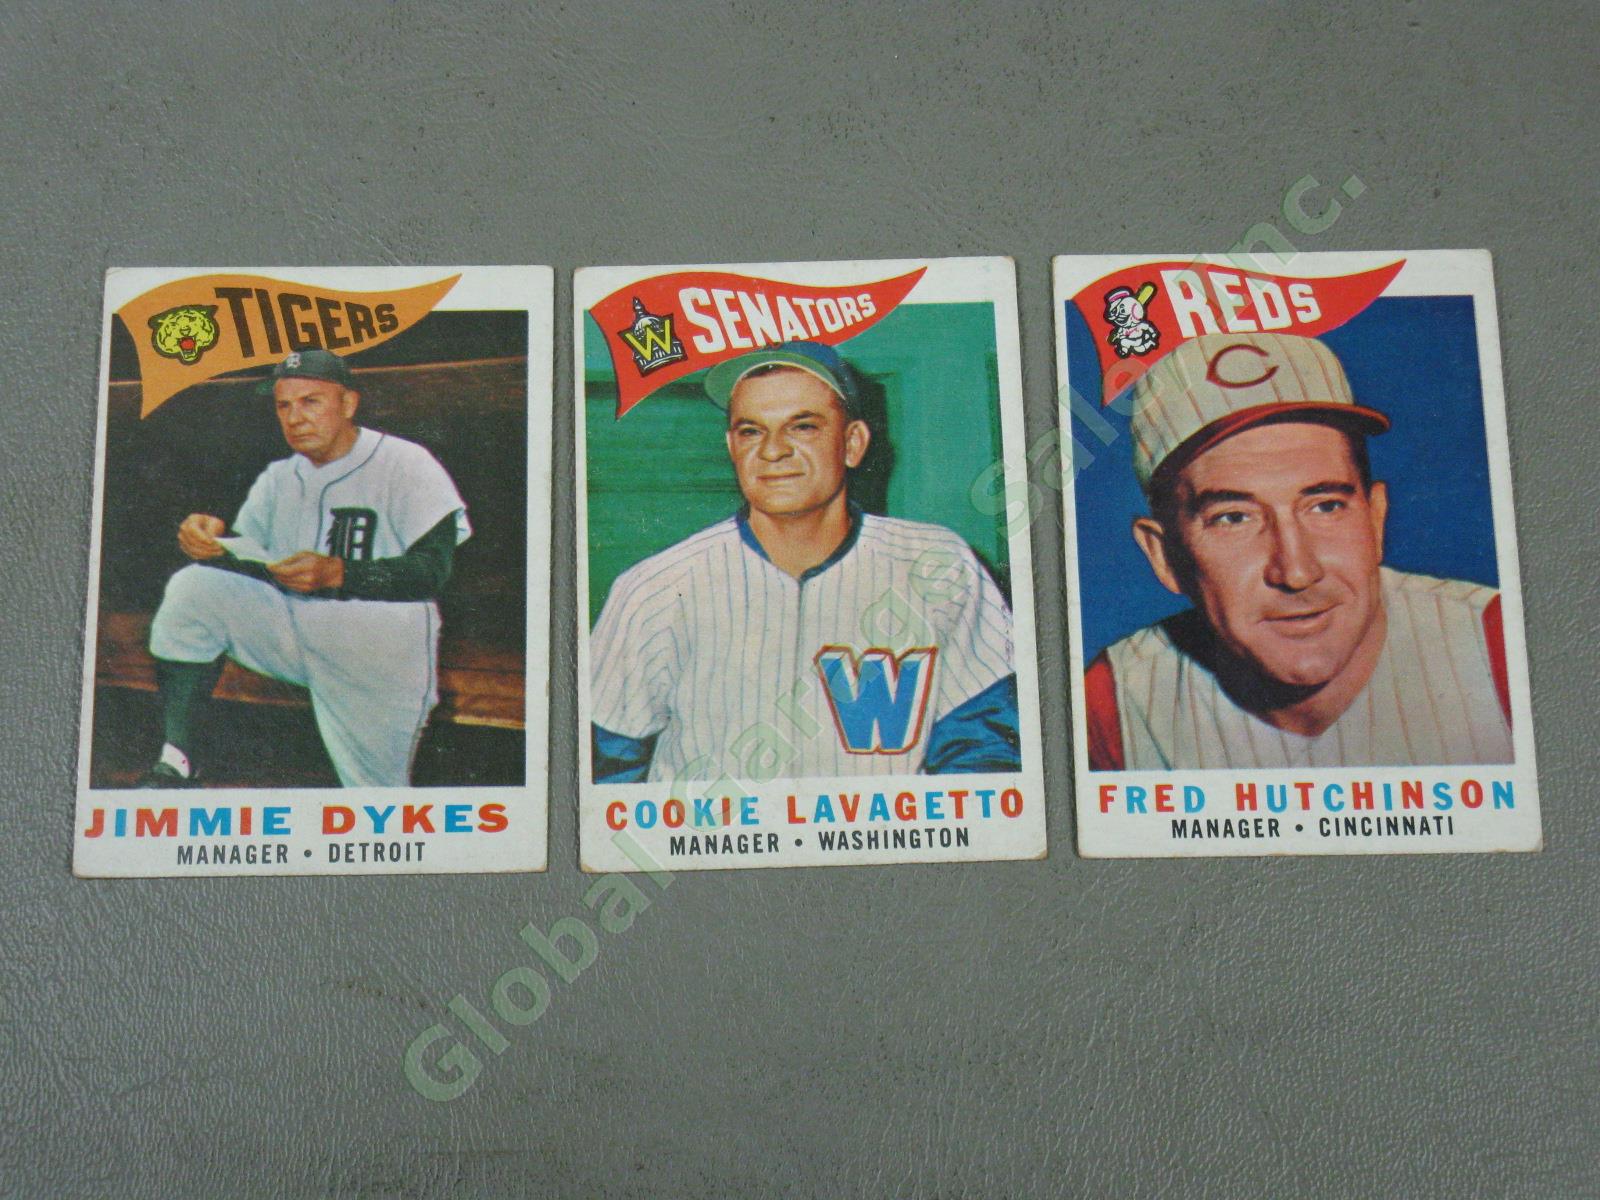 248 Vintage 1960 1960s Topps Baseball Card Lot Rookie Stars Teams Managers NR! 6